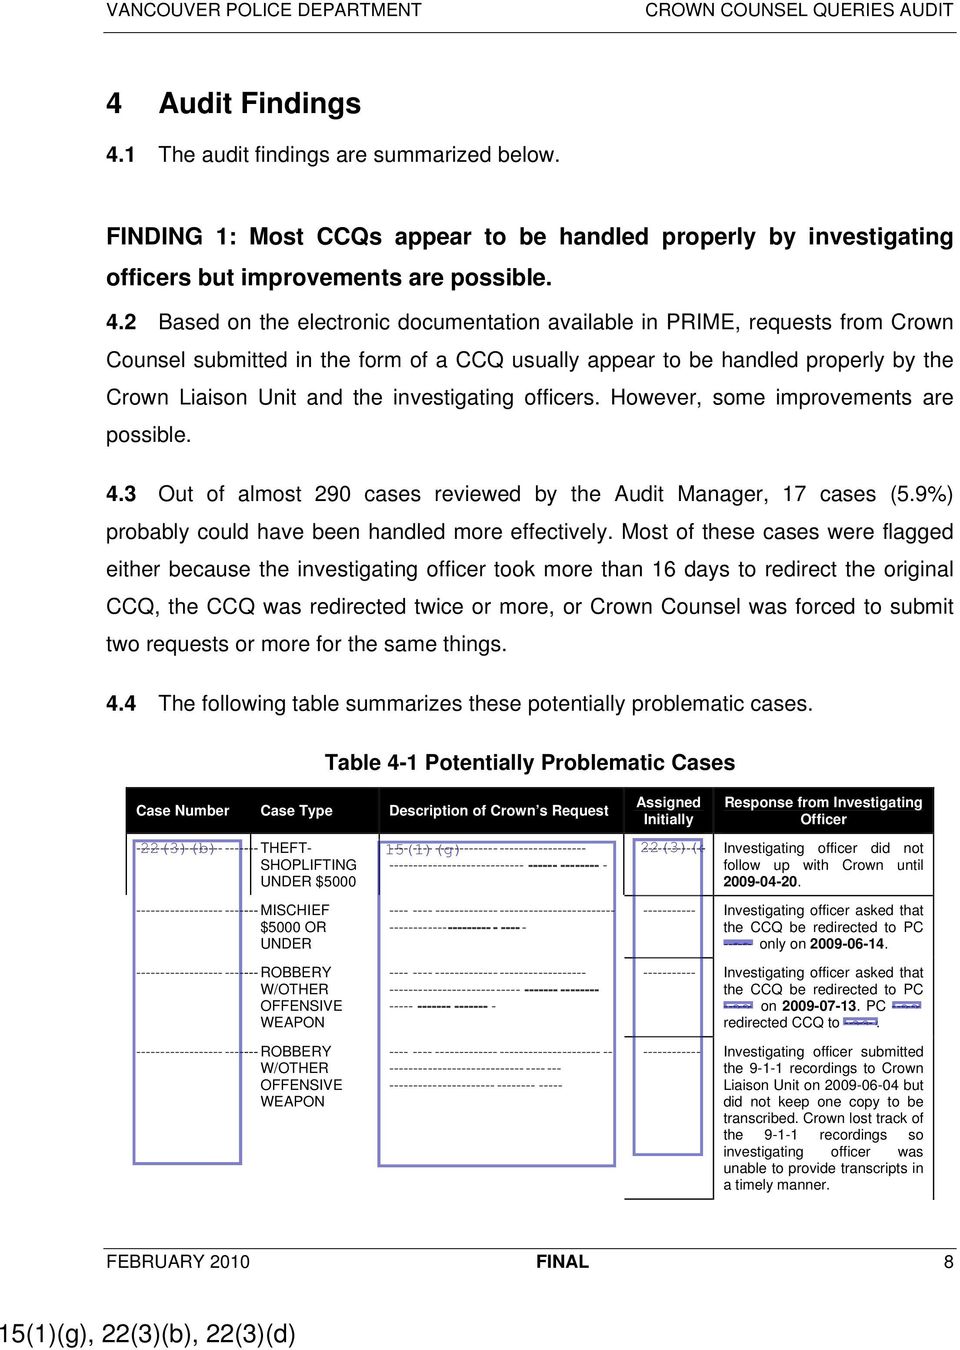 2 Based on the electronic documentation available in PRIME, requests from Crown Counsel submitted in the form of a CCQ usually appear to be handled properly by the Crown Liaison Unit and the